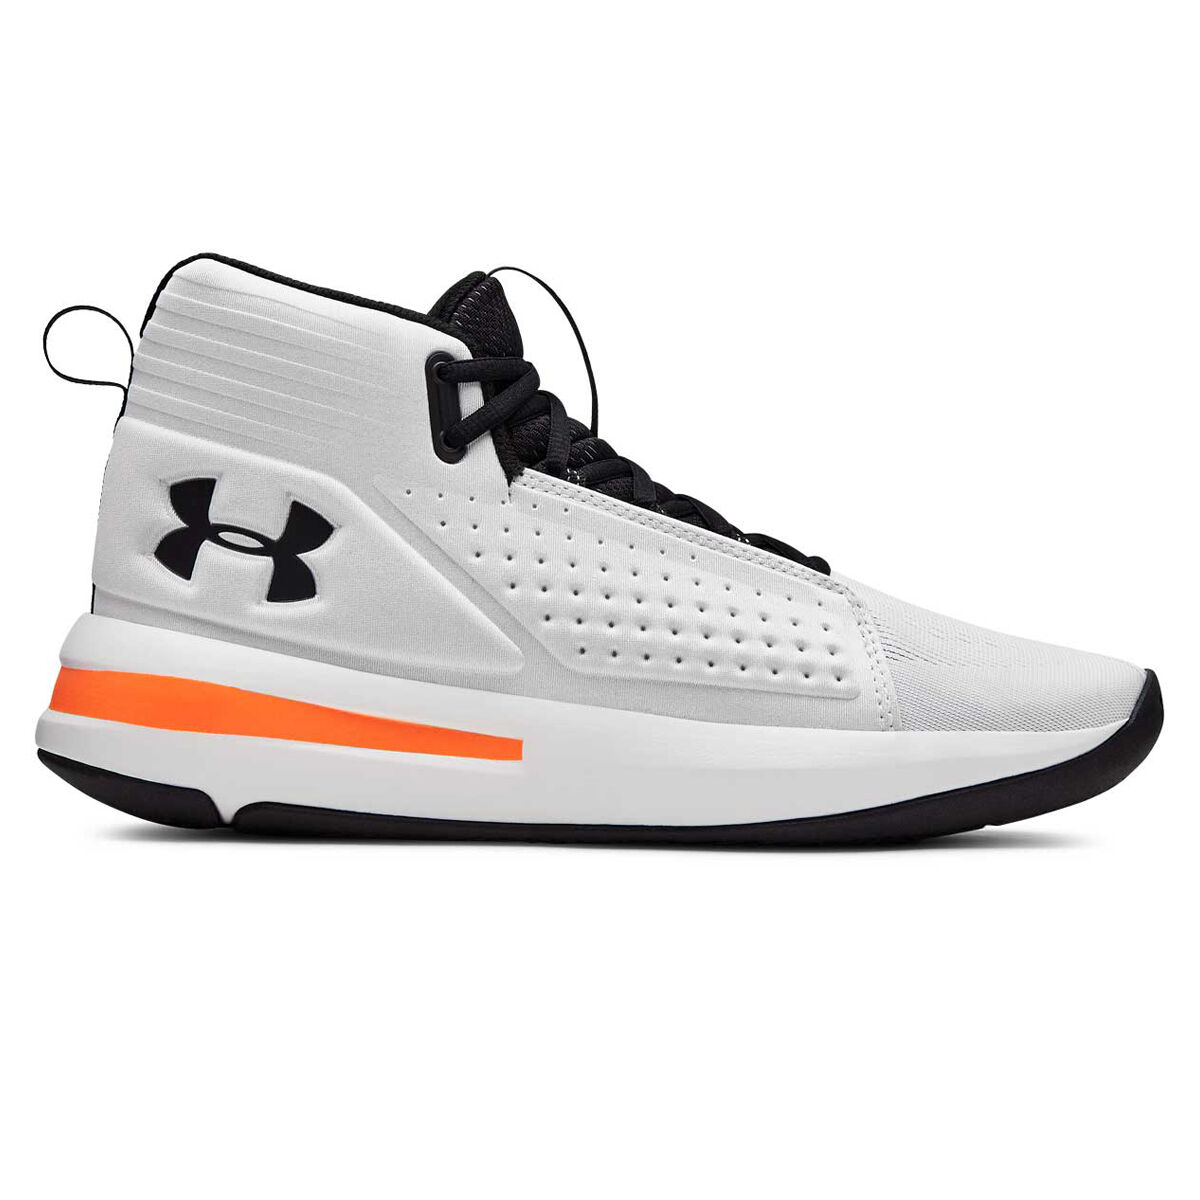 rebel sport under armour shoes